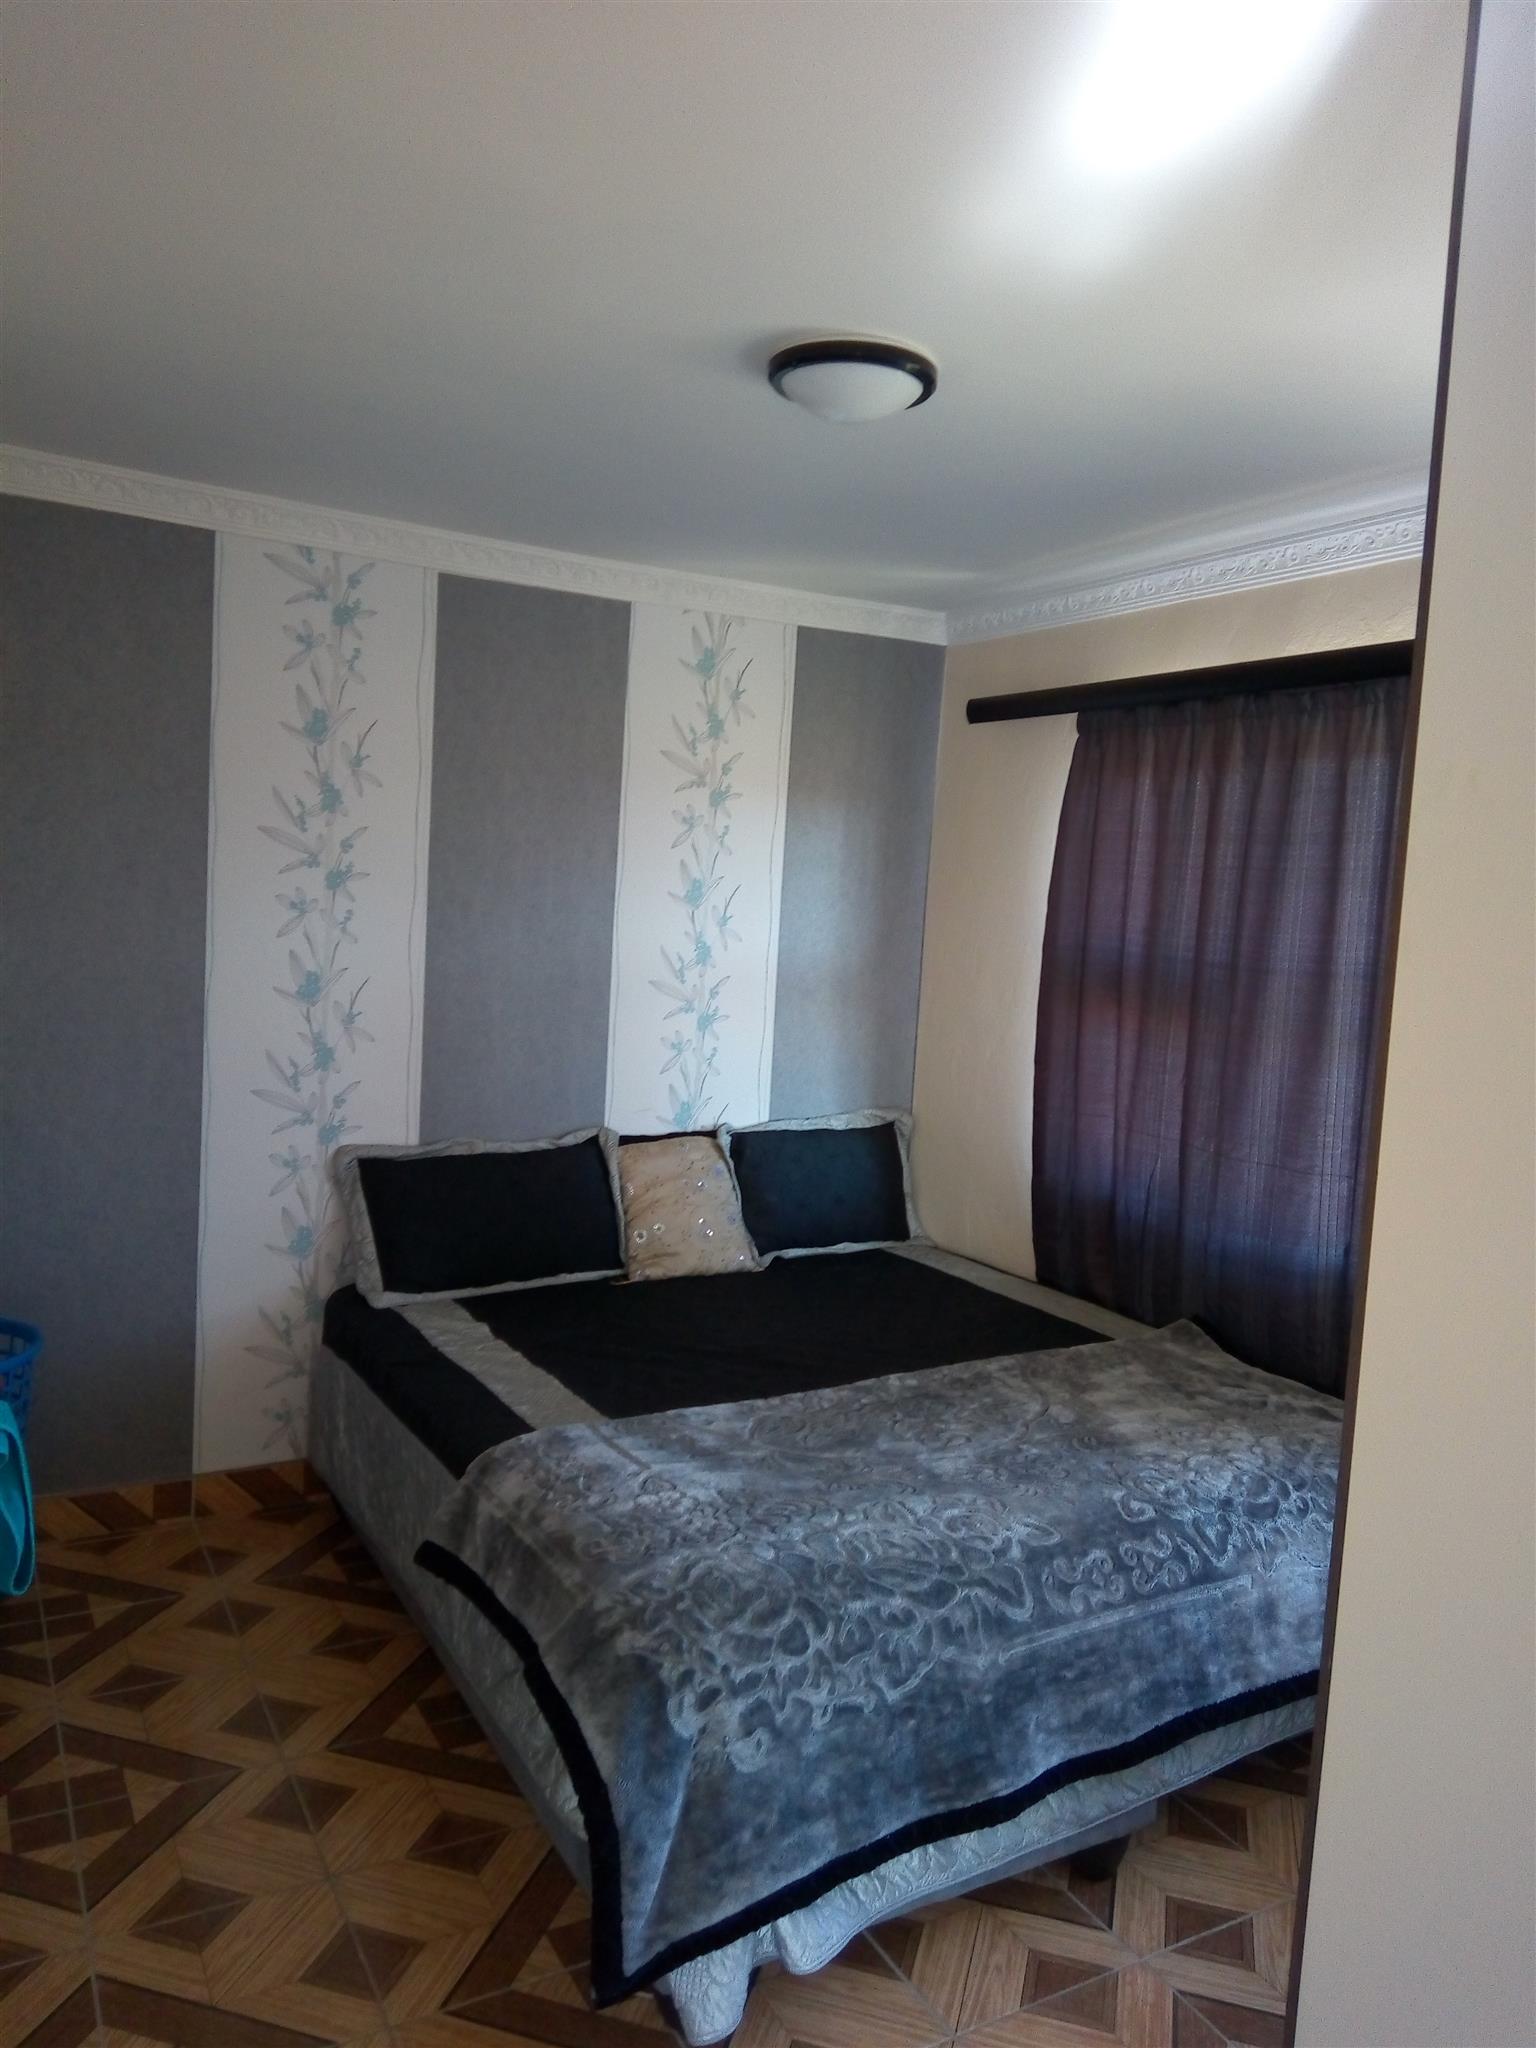 Three Bedroom Flat/Apartment to Rent in Kya Sands Estate/Bloubosrand.